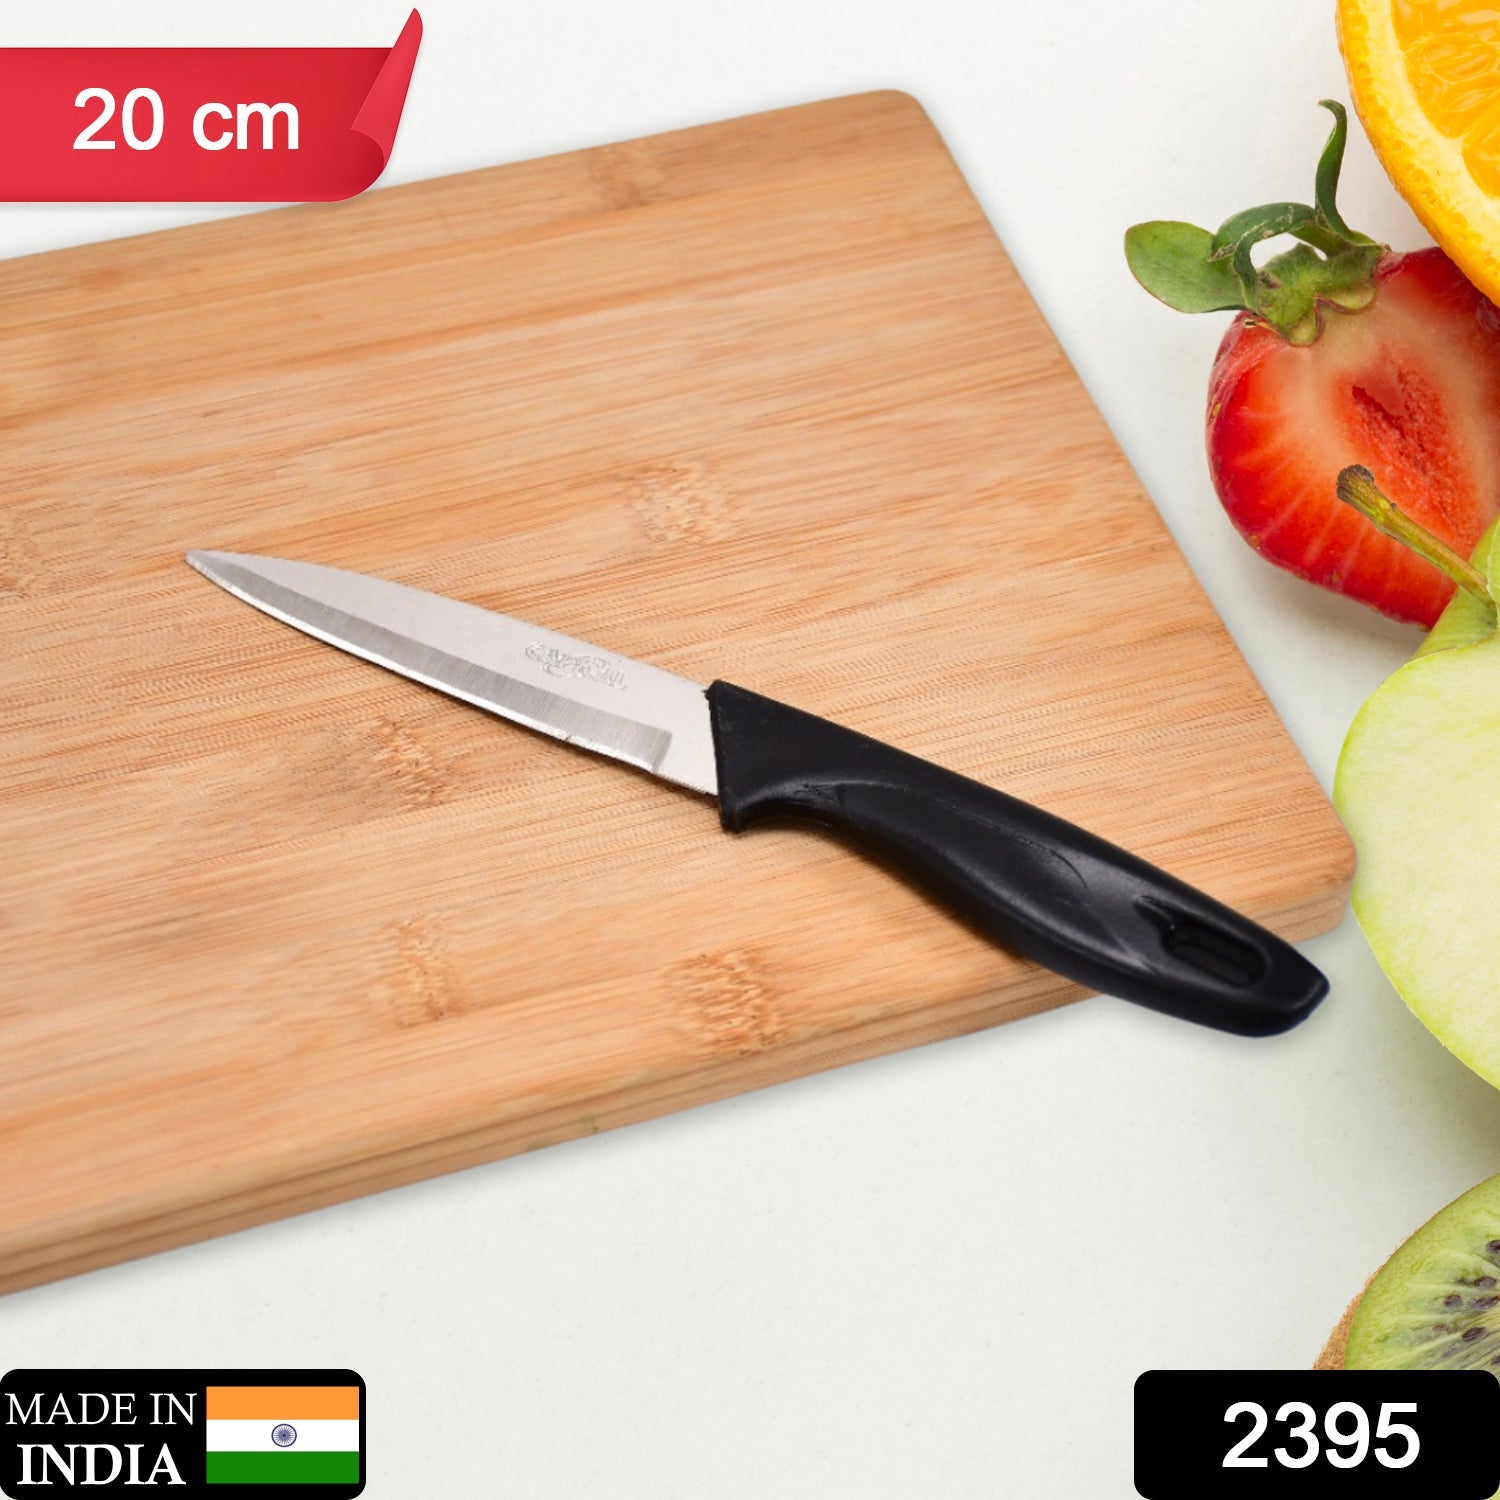 2395 Stainless Steel knife and Kitchen Knife with Black Grip Handle (20 Cm) DeoDap